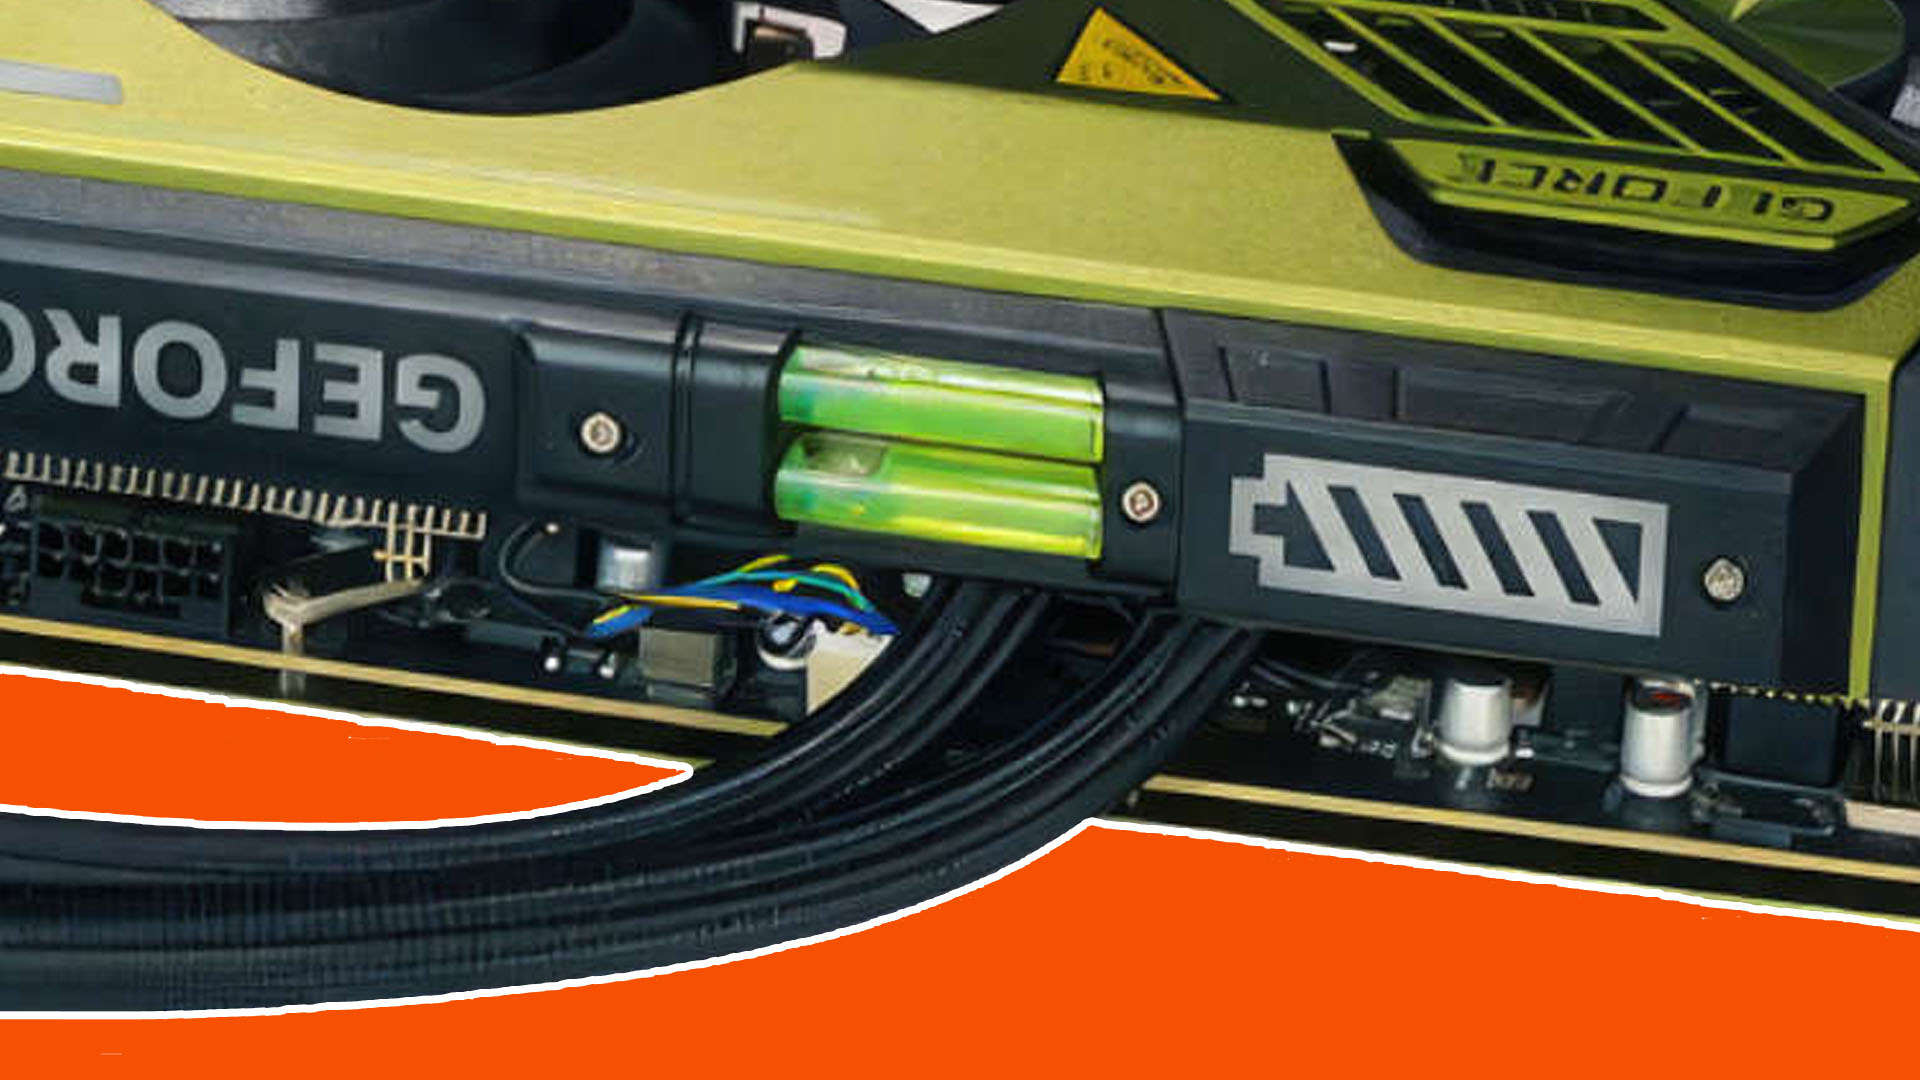 This Nvidia RTX 4080 Super is the most expensive spirit level ever